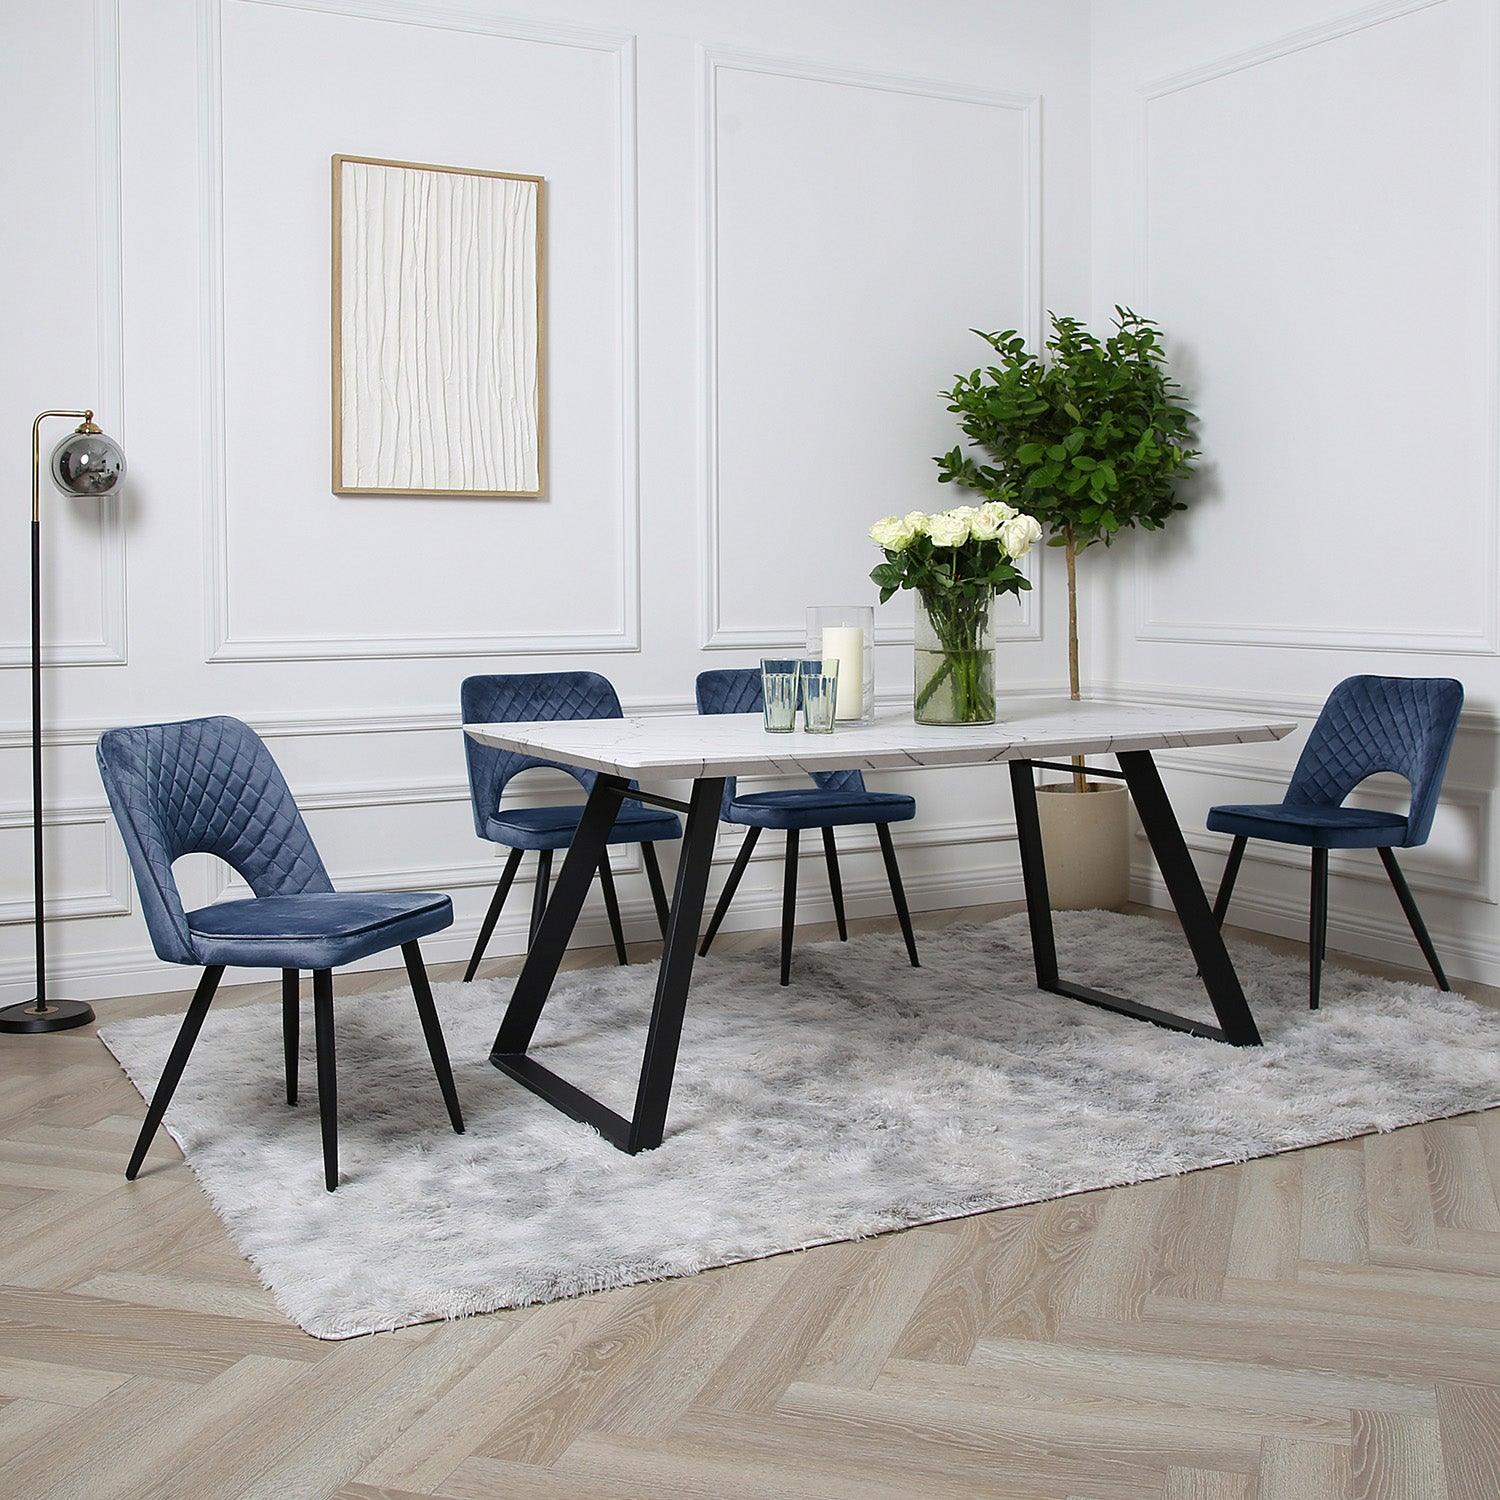 Atlas marble dining table set - 4 seater - blue dining chairs - Laura James